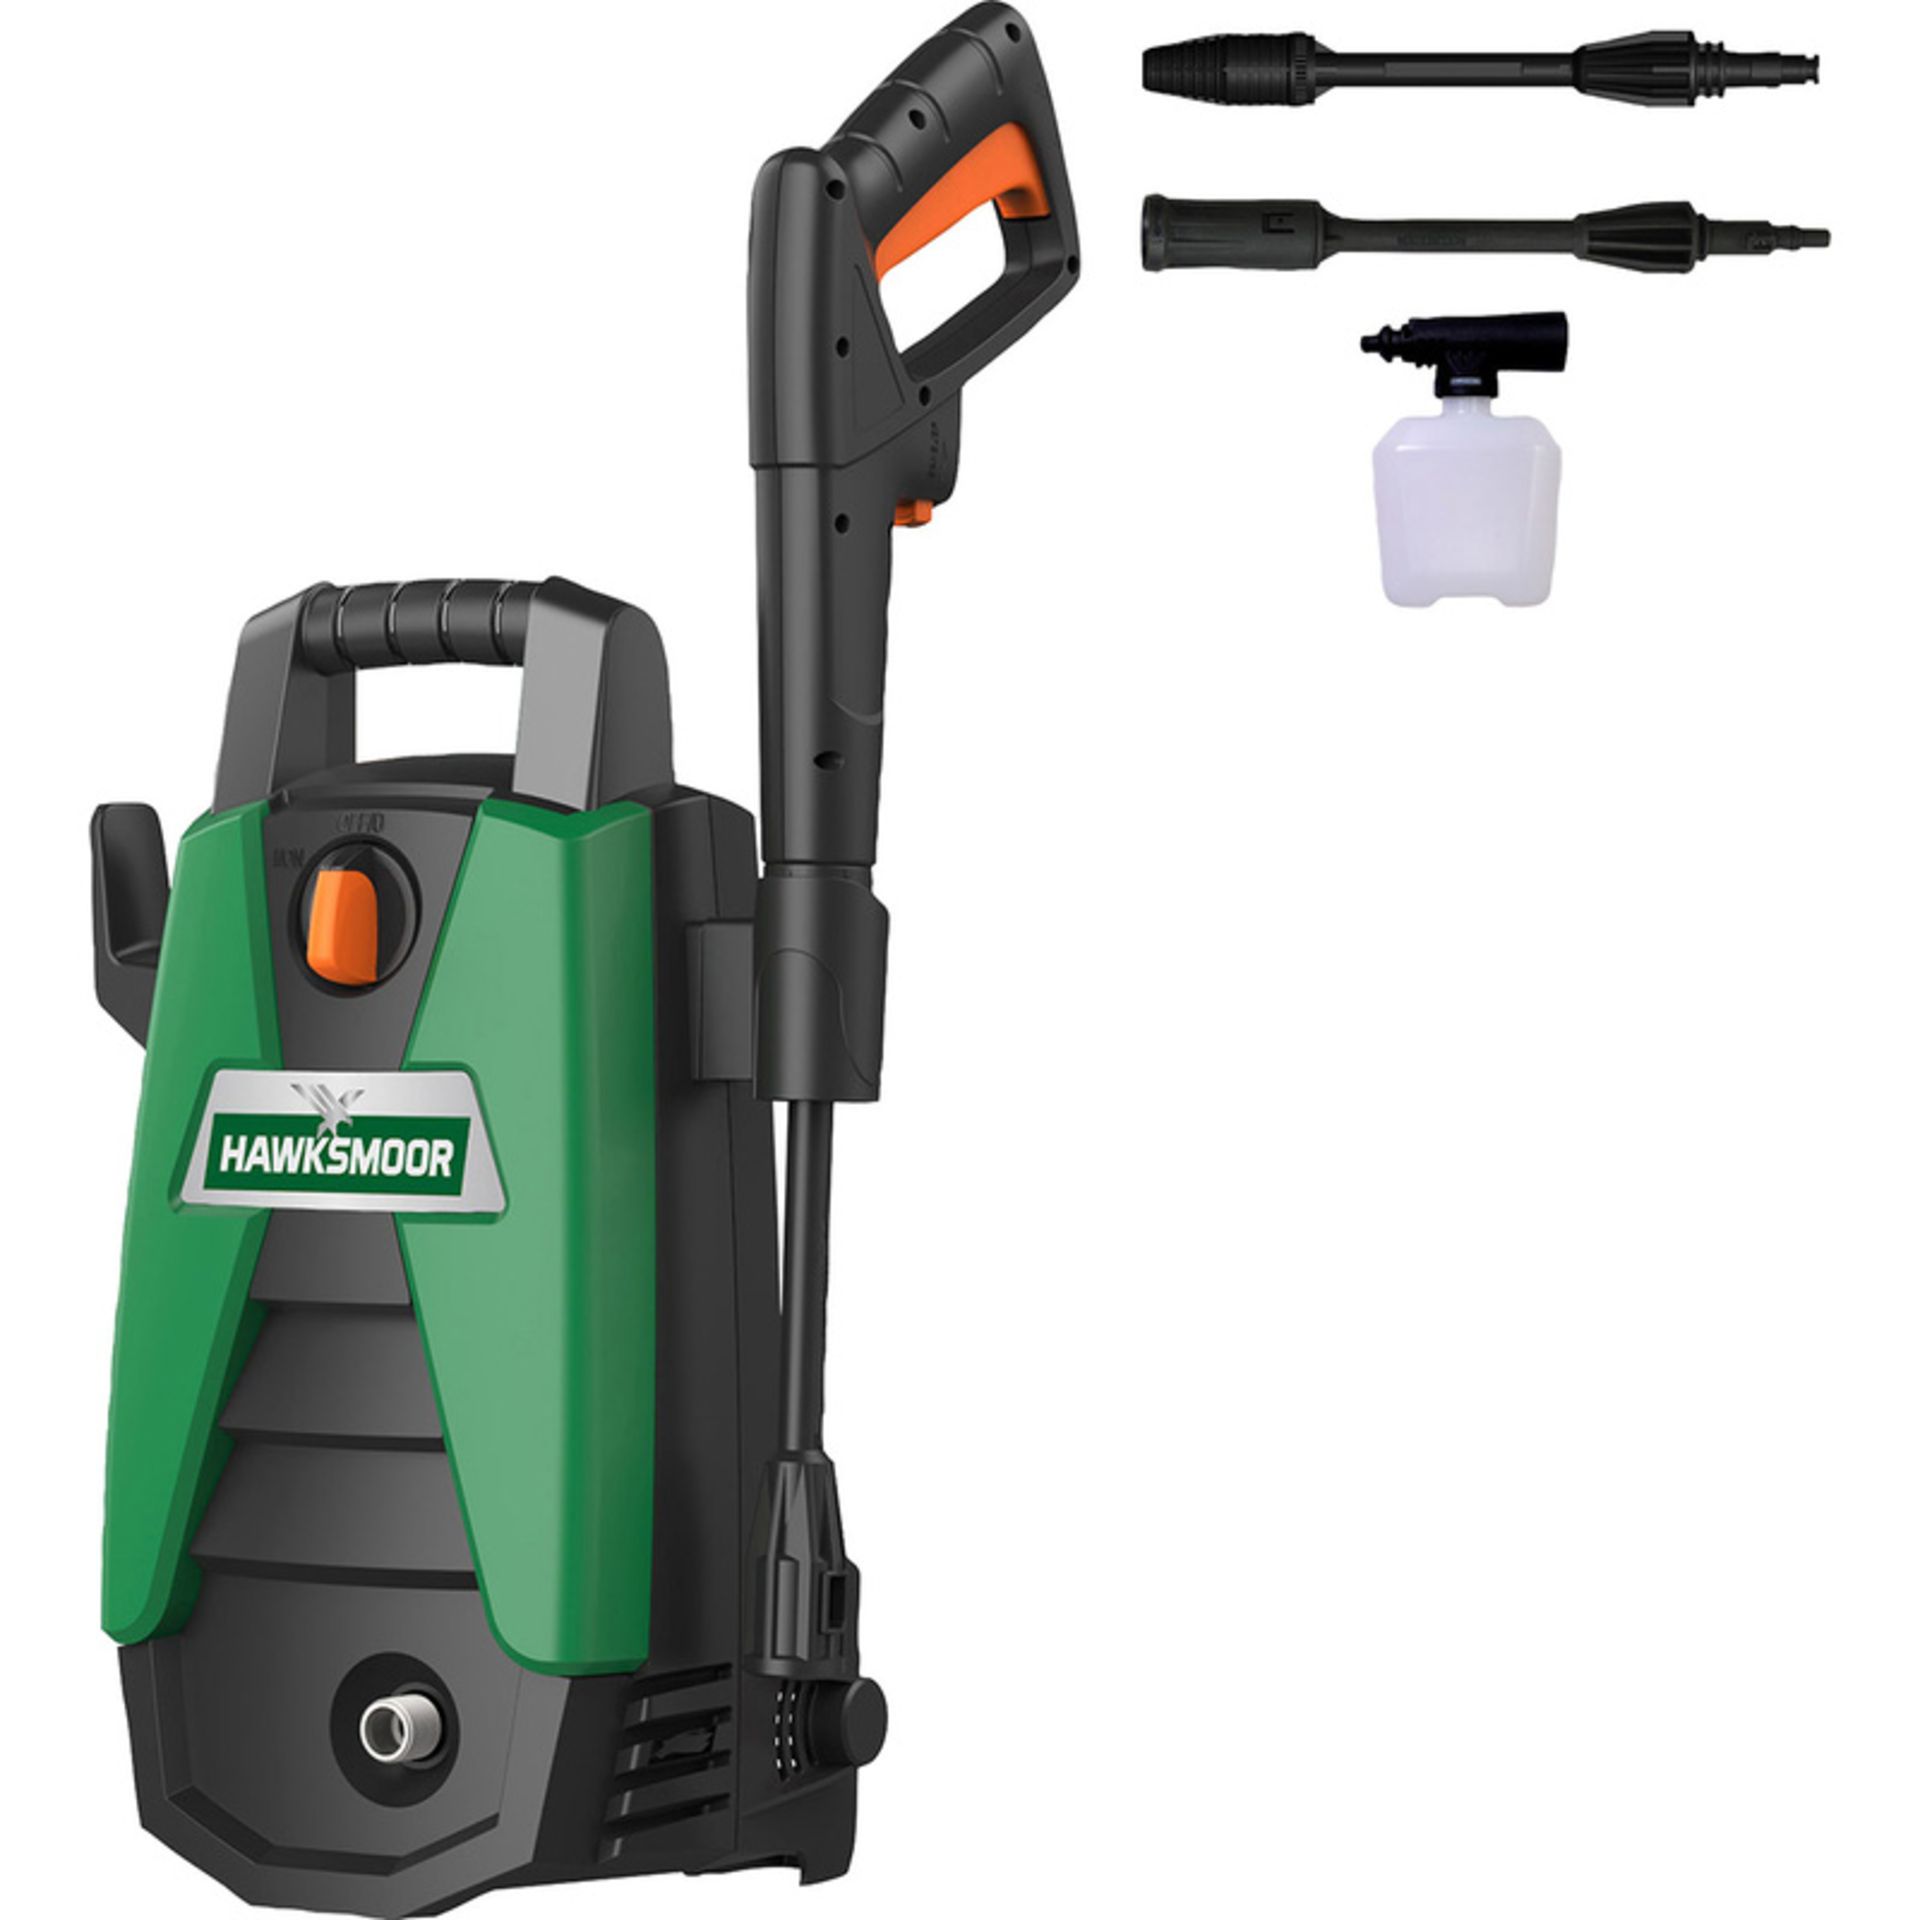 7 x Hawksmoor High Pressure Washer 108bar. - ER32. Features quick lock and release system for high